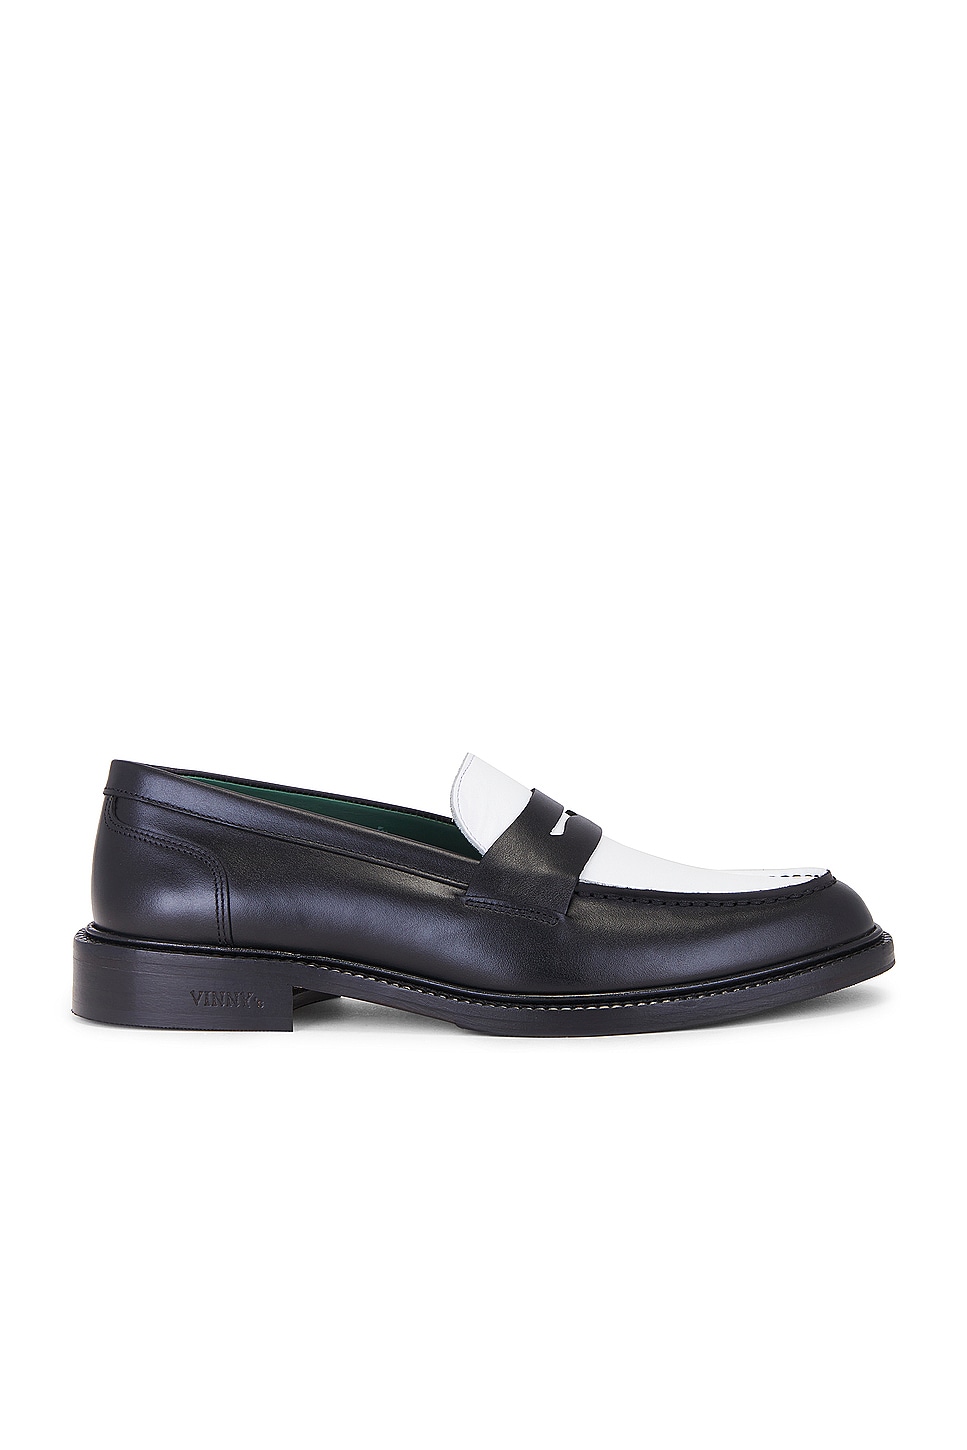 Image 1 of Vinny's Townee Two Tone Penny Loafer in Leather Black